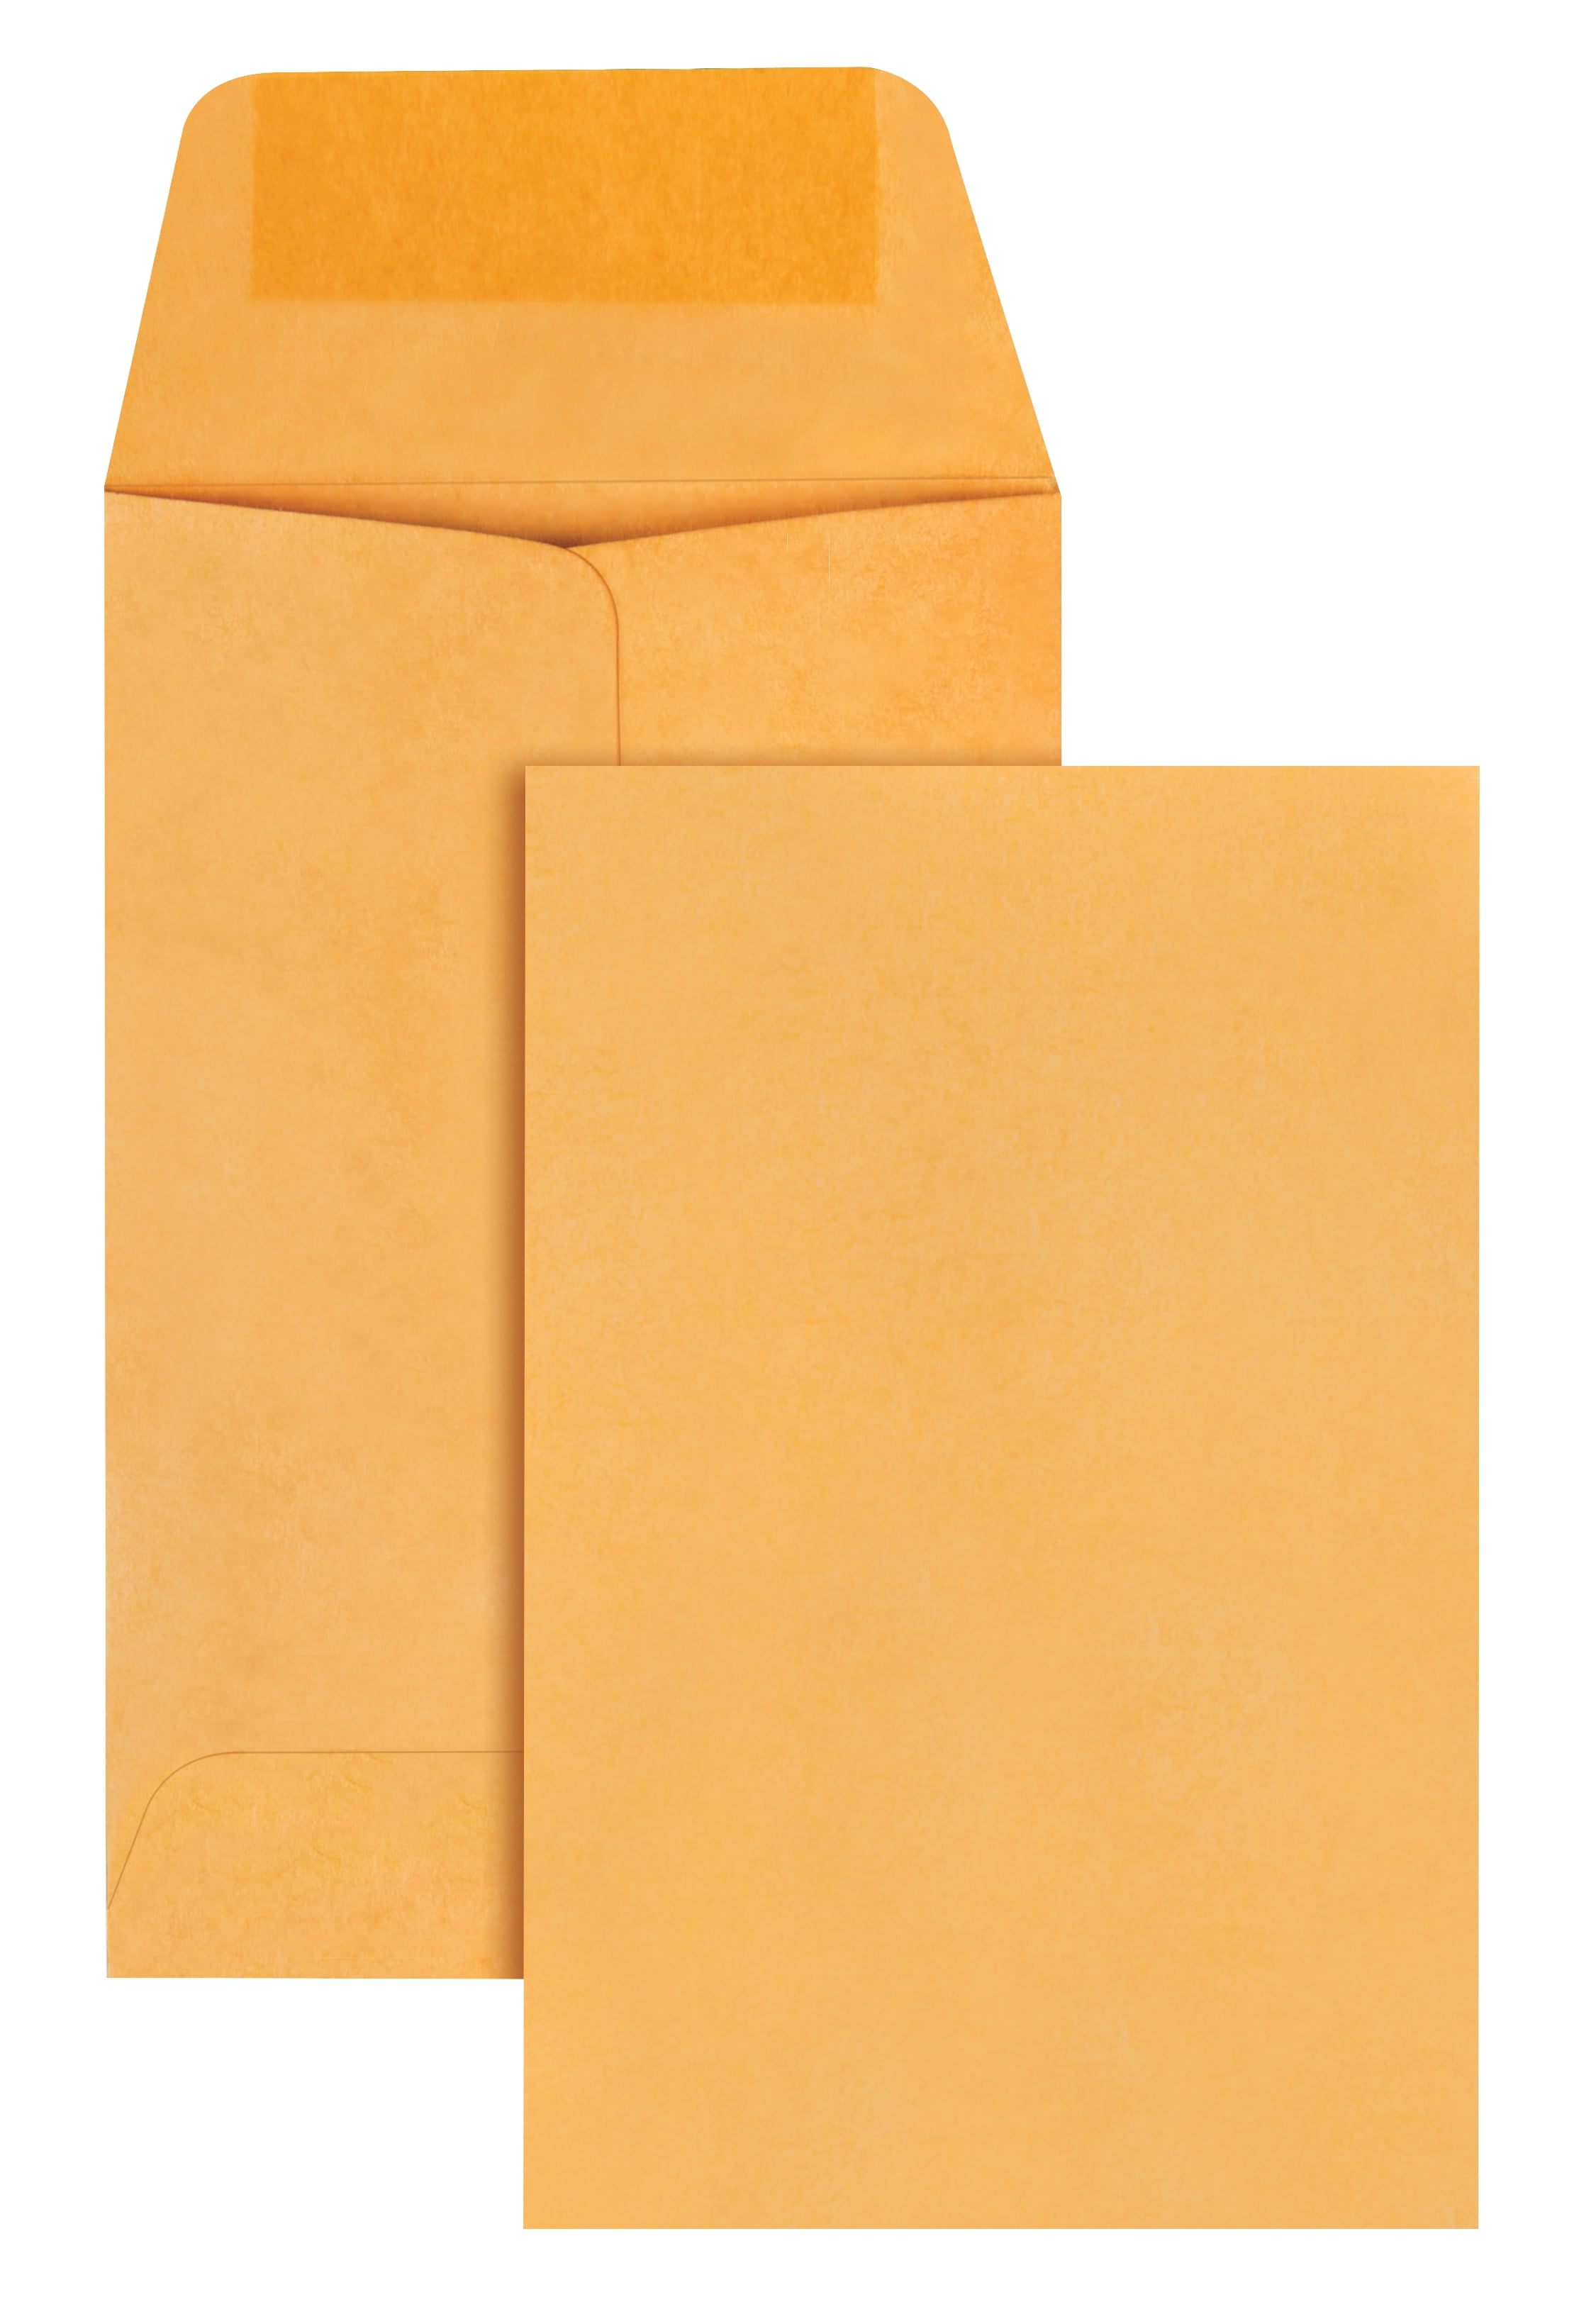  Quality ParkTM Envelope Moistener with Adhesive APPLICATOR,ENVELOPE  GLUE 2947B001 (Pack of50) : Envelope And Stamp Moisteners : Office Products